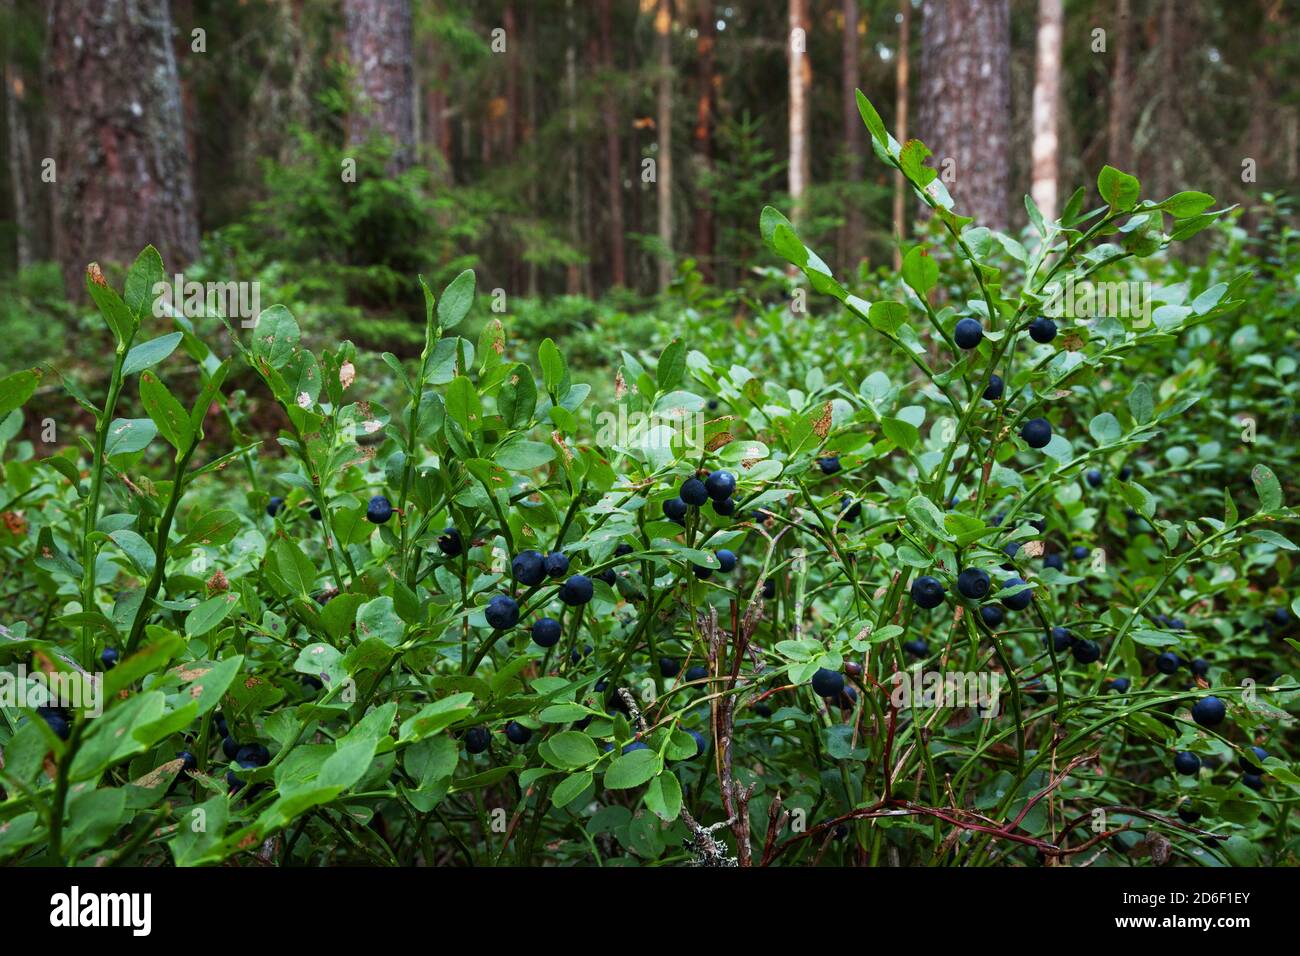 Ripe Wild blueberries, Vaccinium myrtillus ready to pick in lush summery boreal forest, Northern Europe. Stock Photo